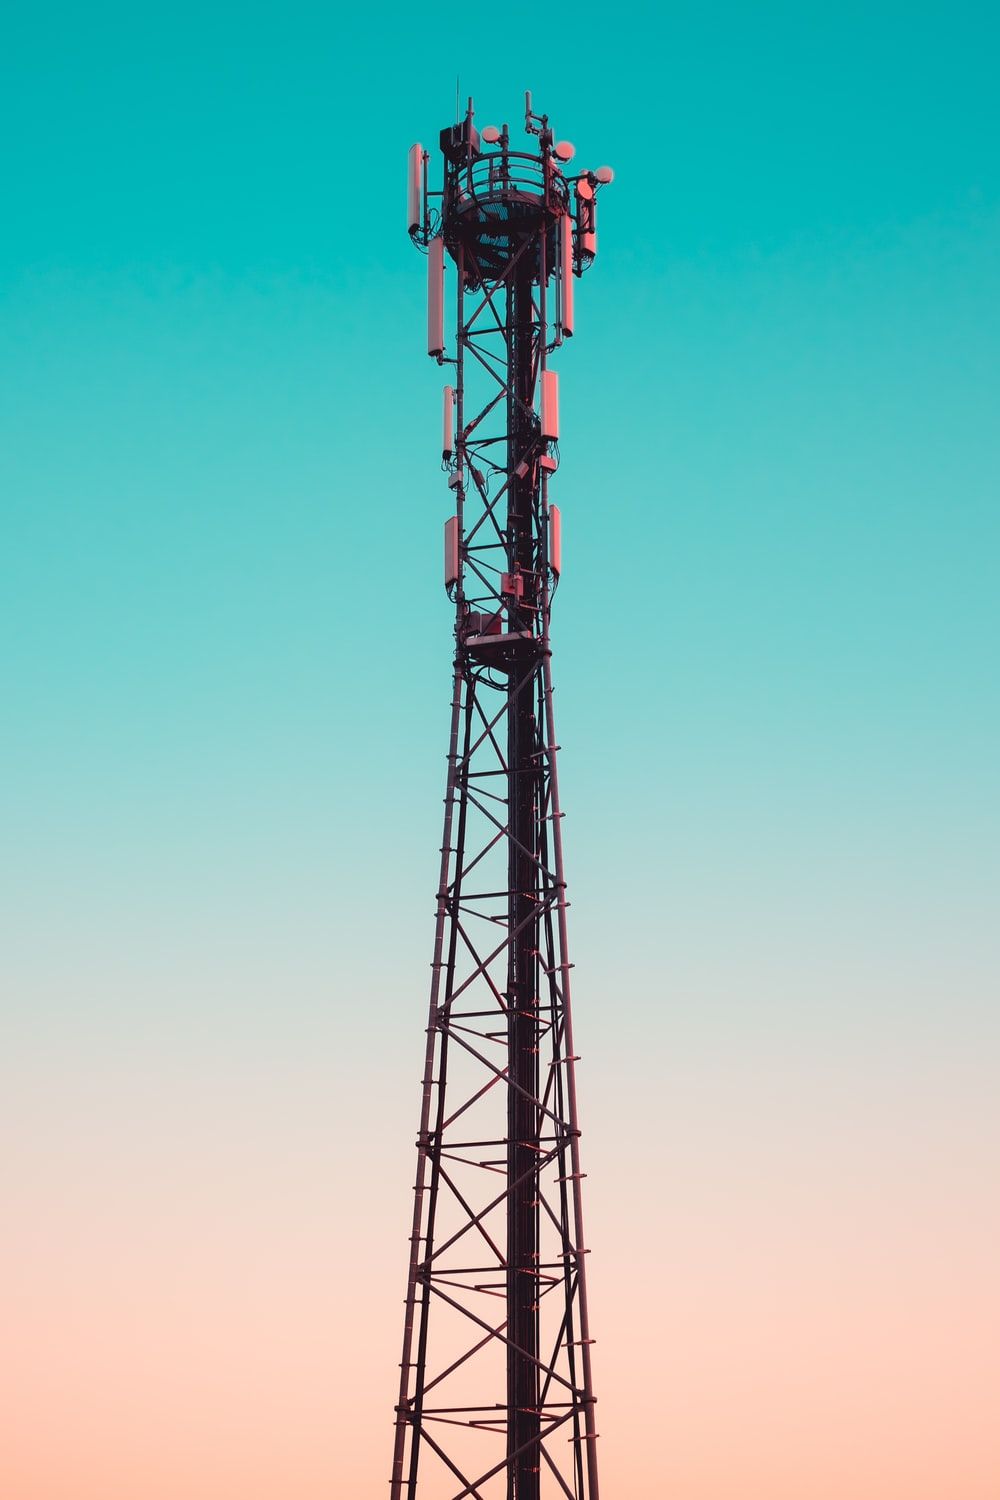 Antenna Picture. Download Free Image